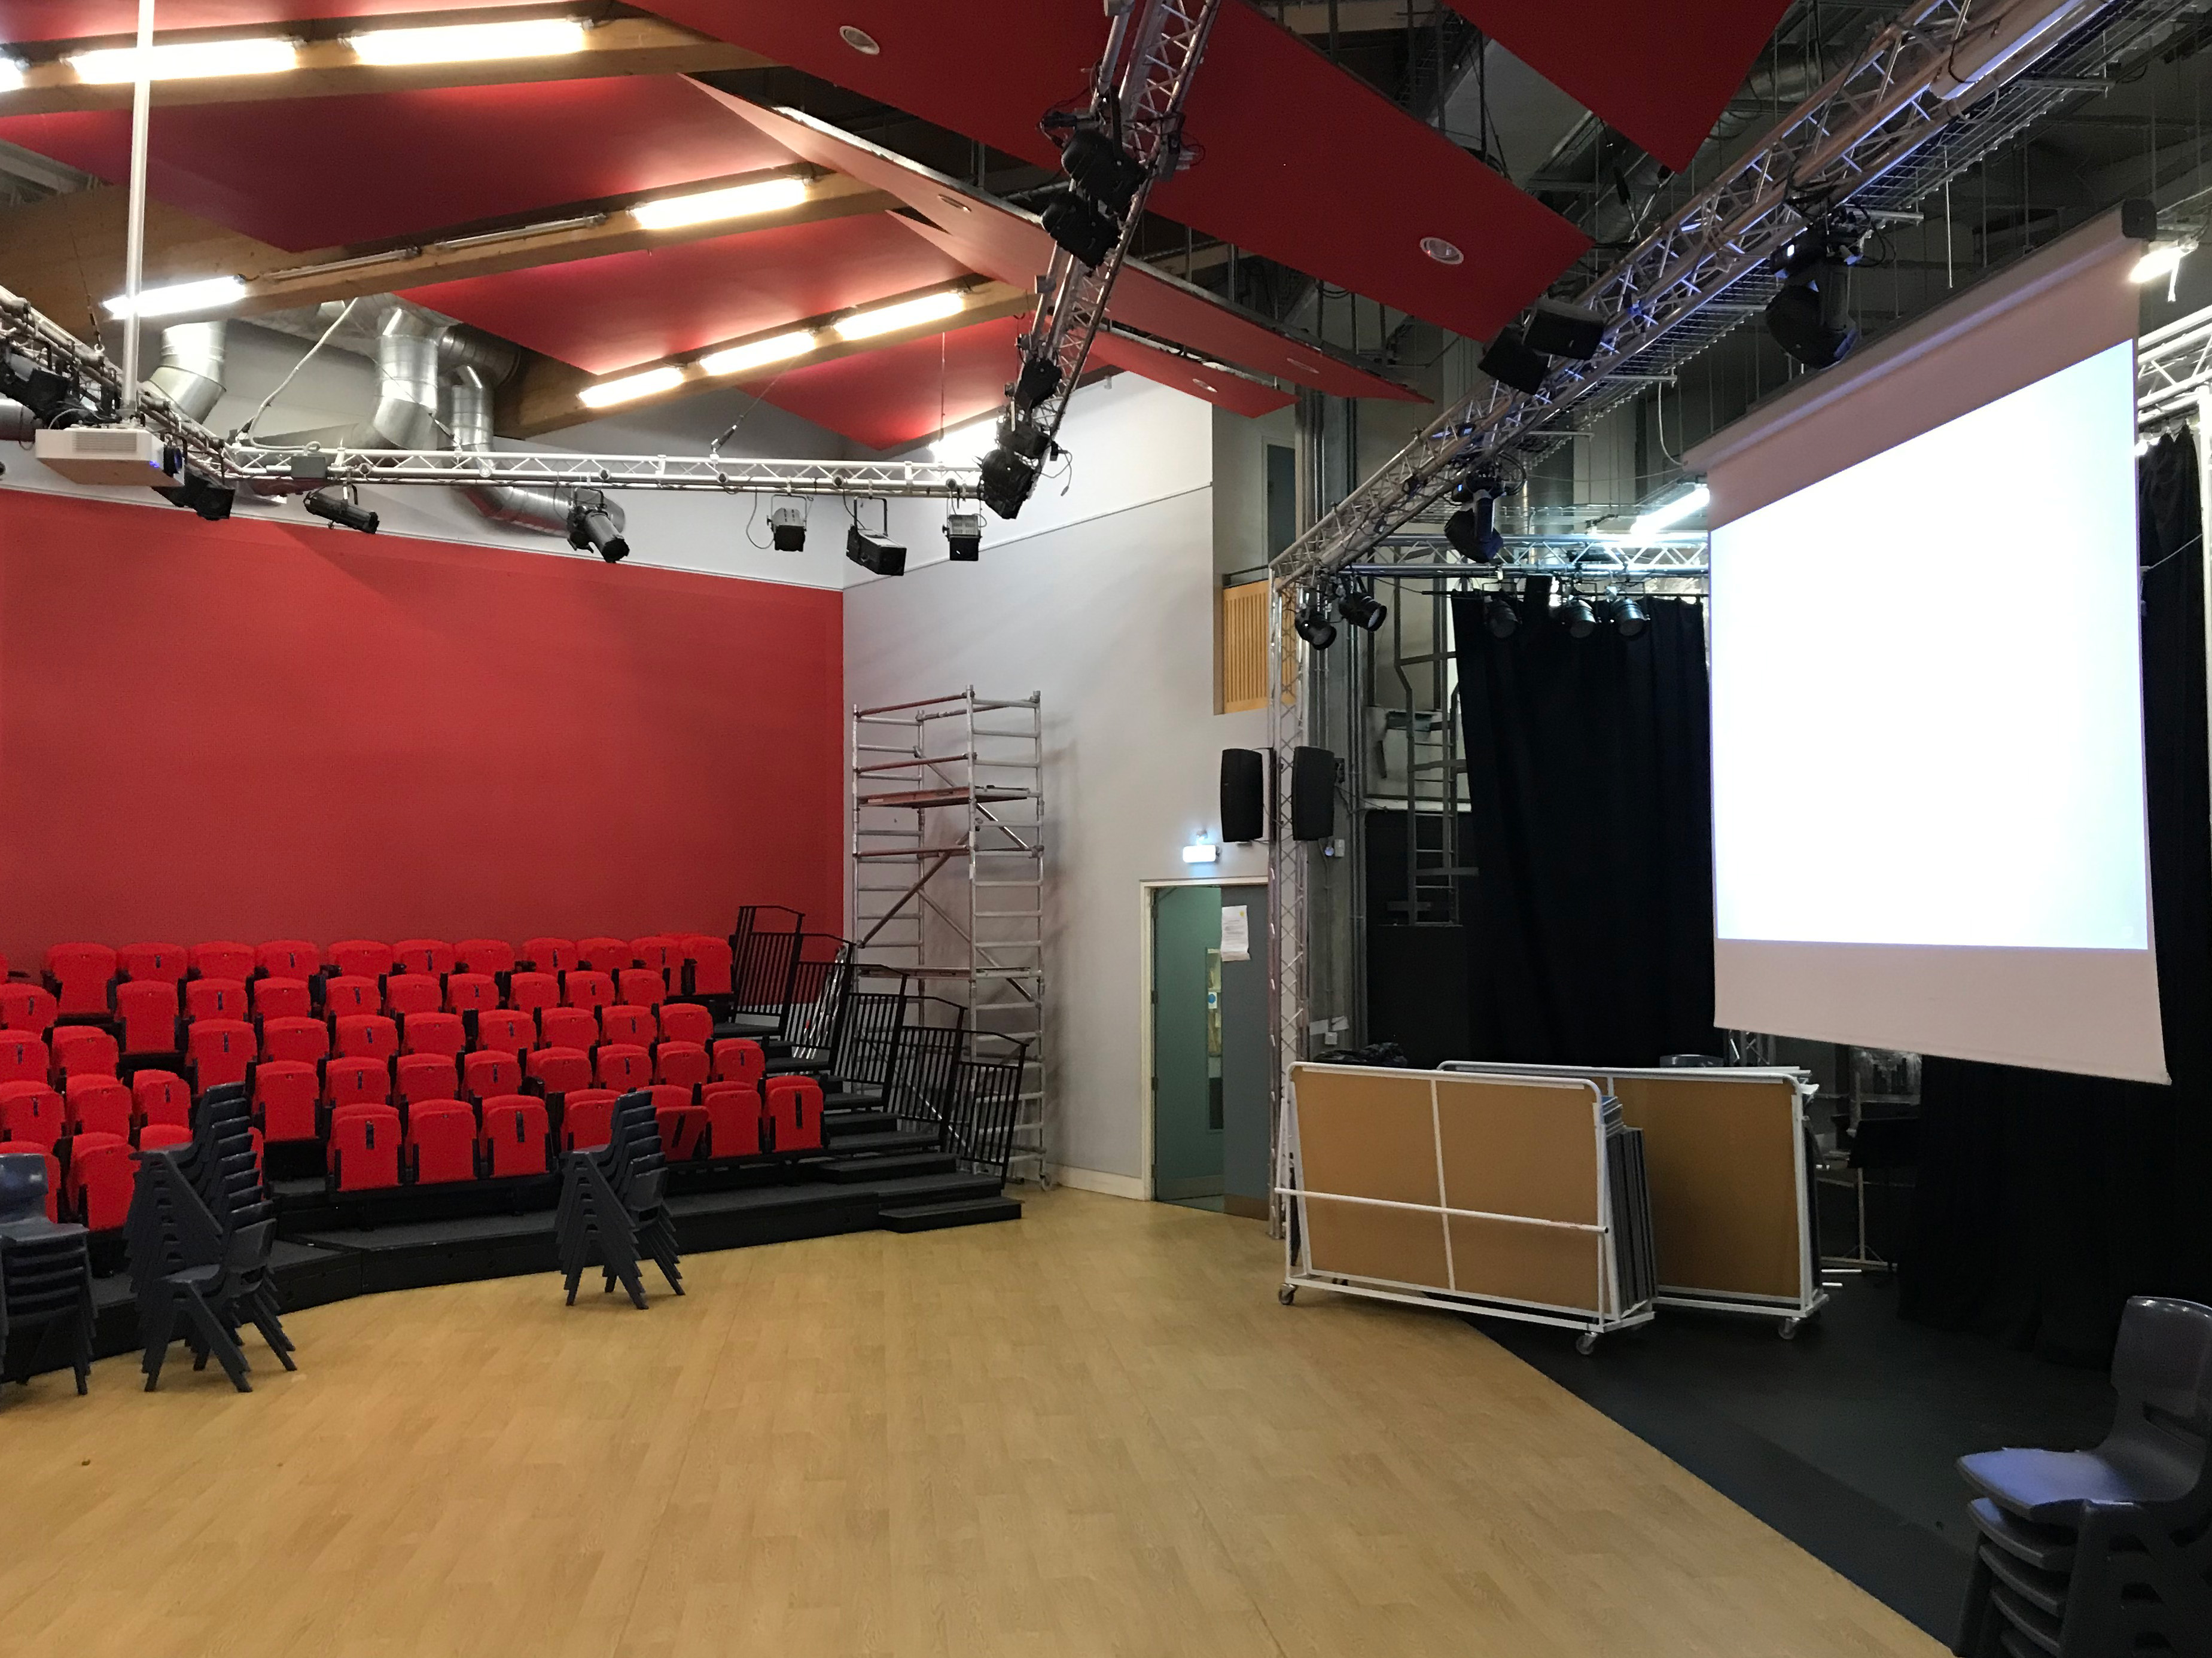  Projector and screen in school hall installation 